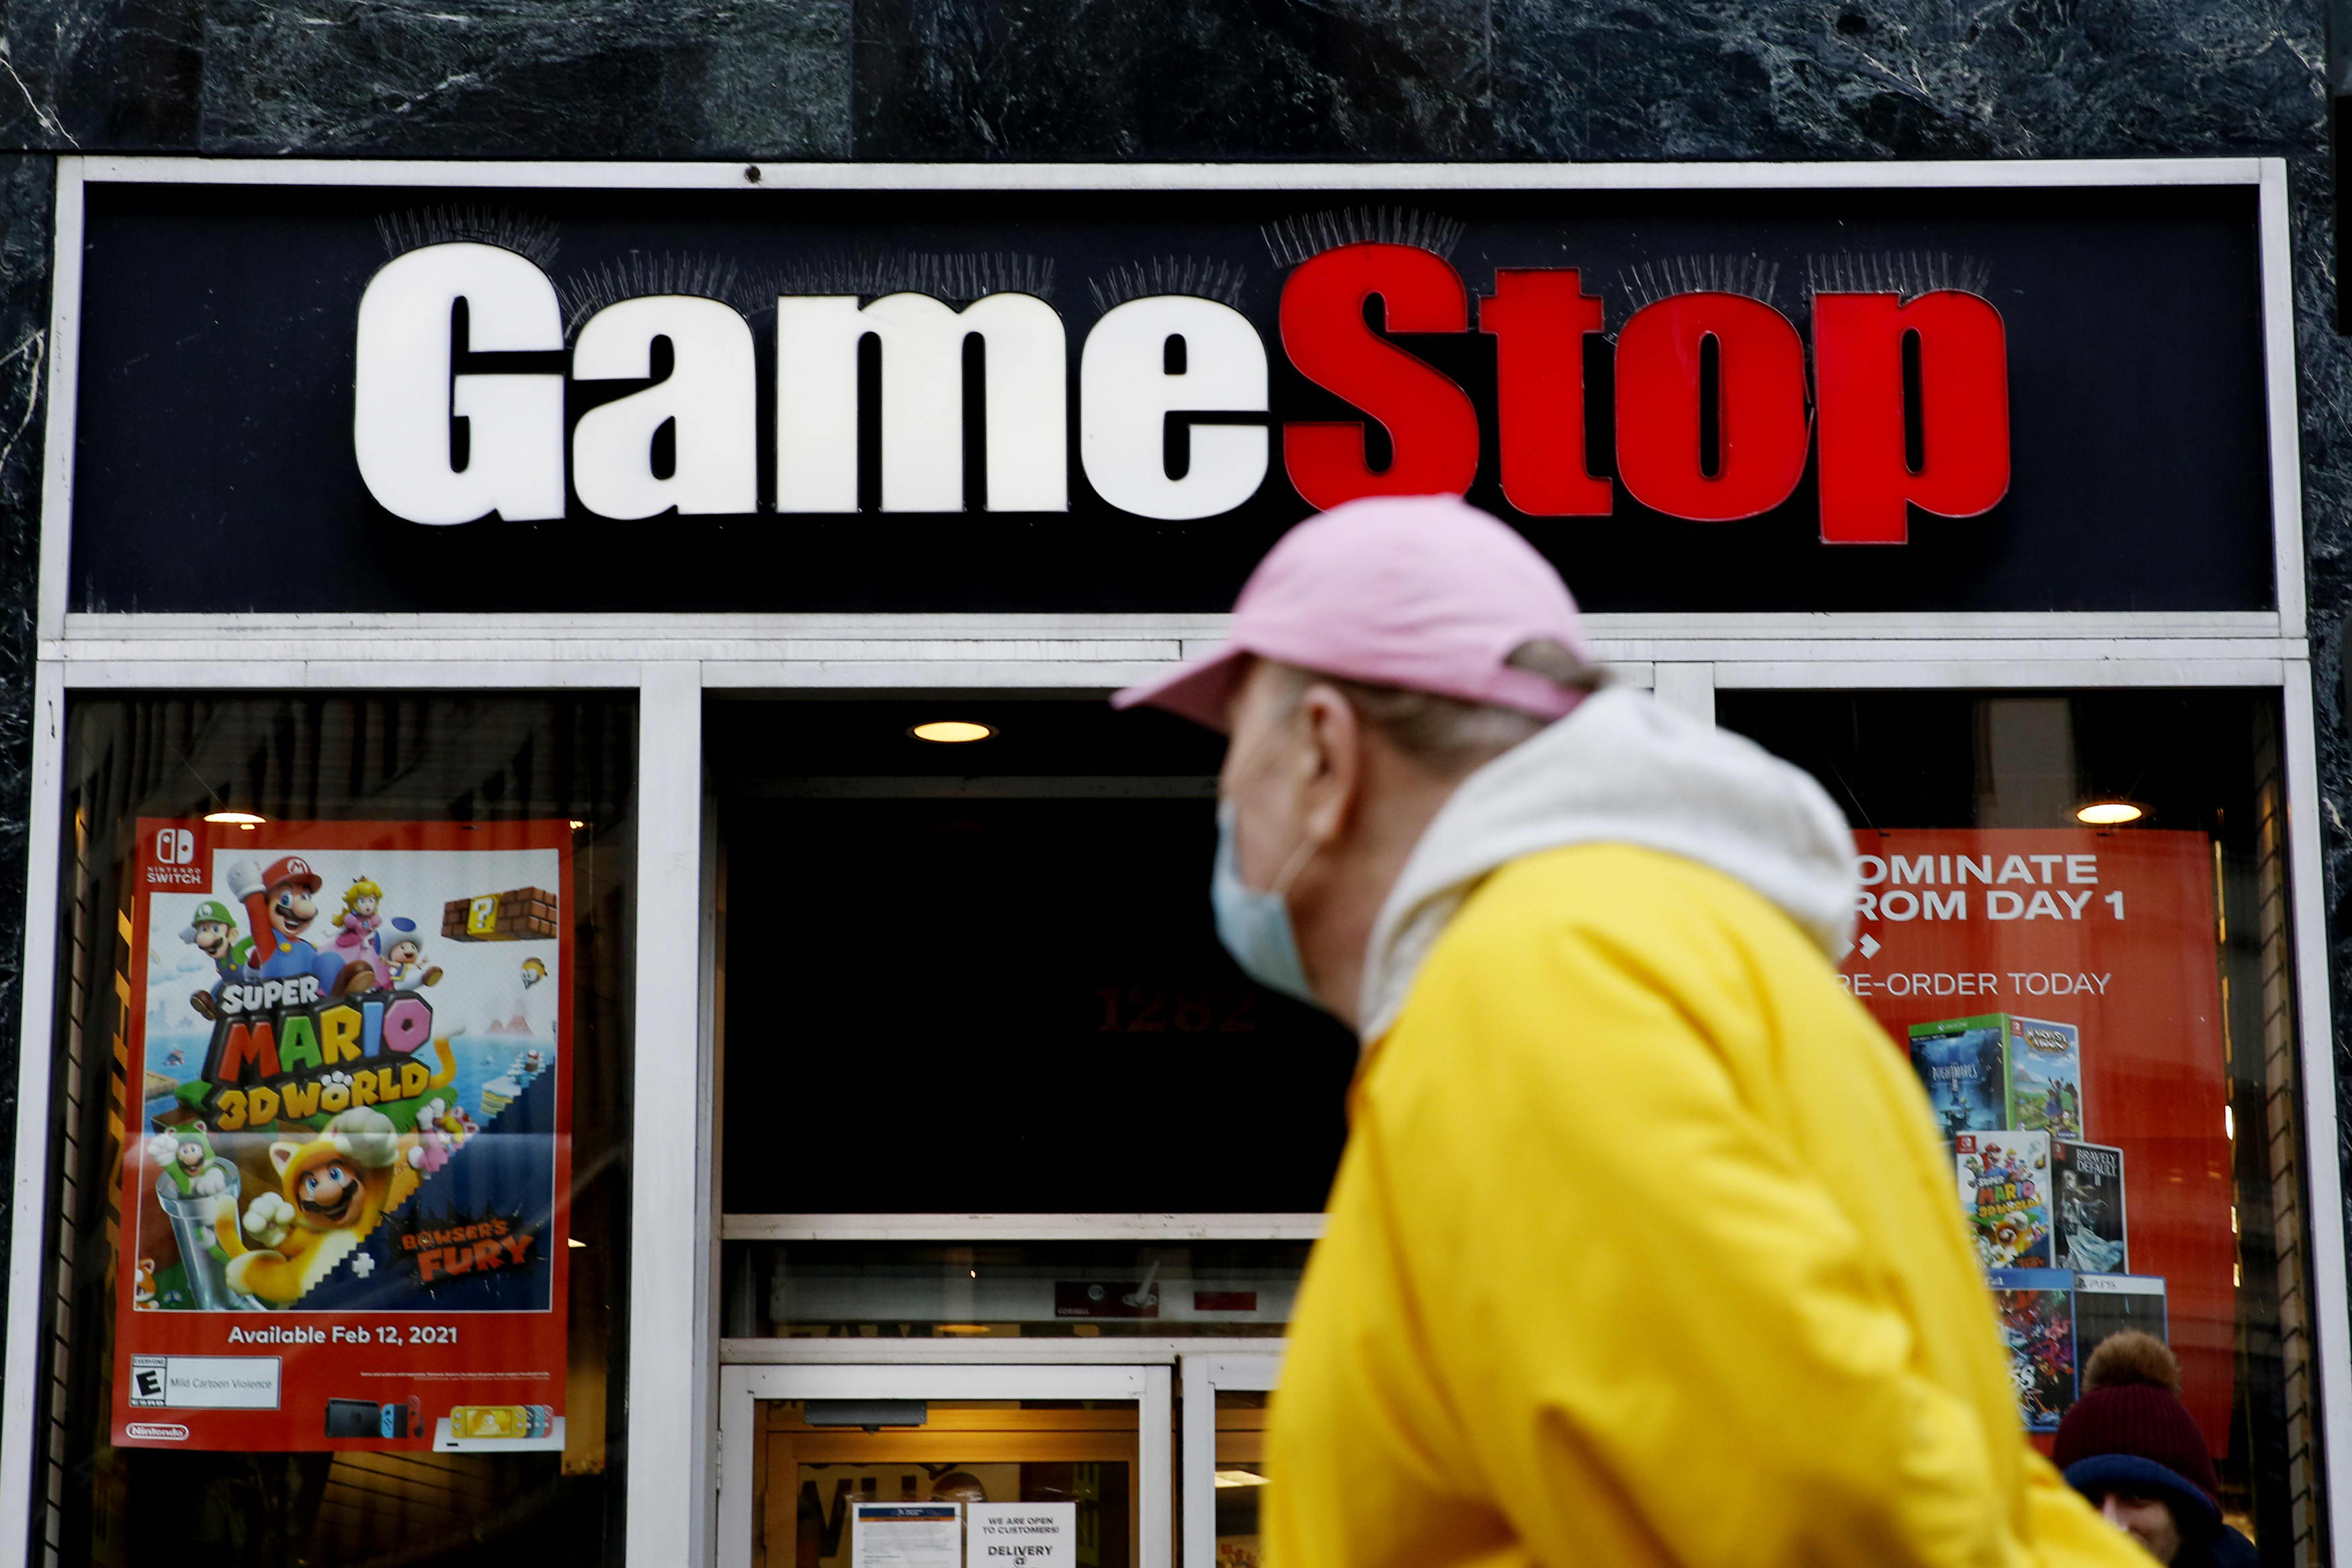 GameStop avoids falling profits and rises 50% to adjust the recent slide